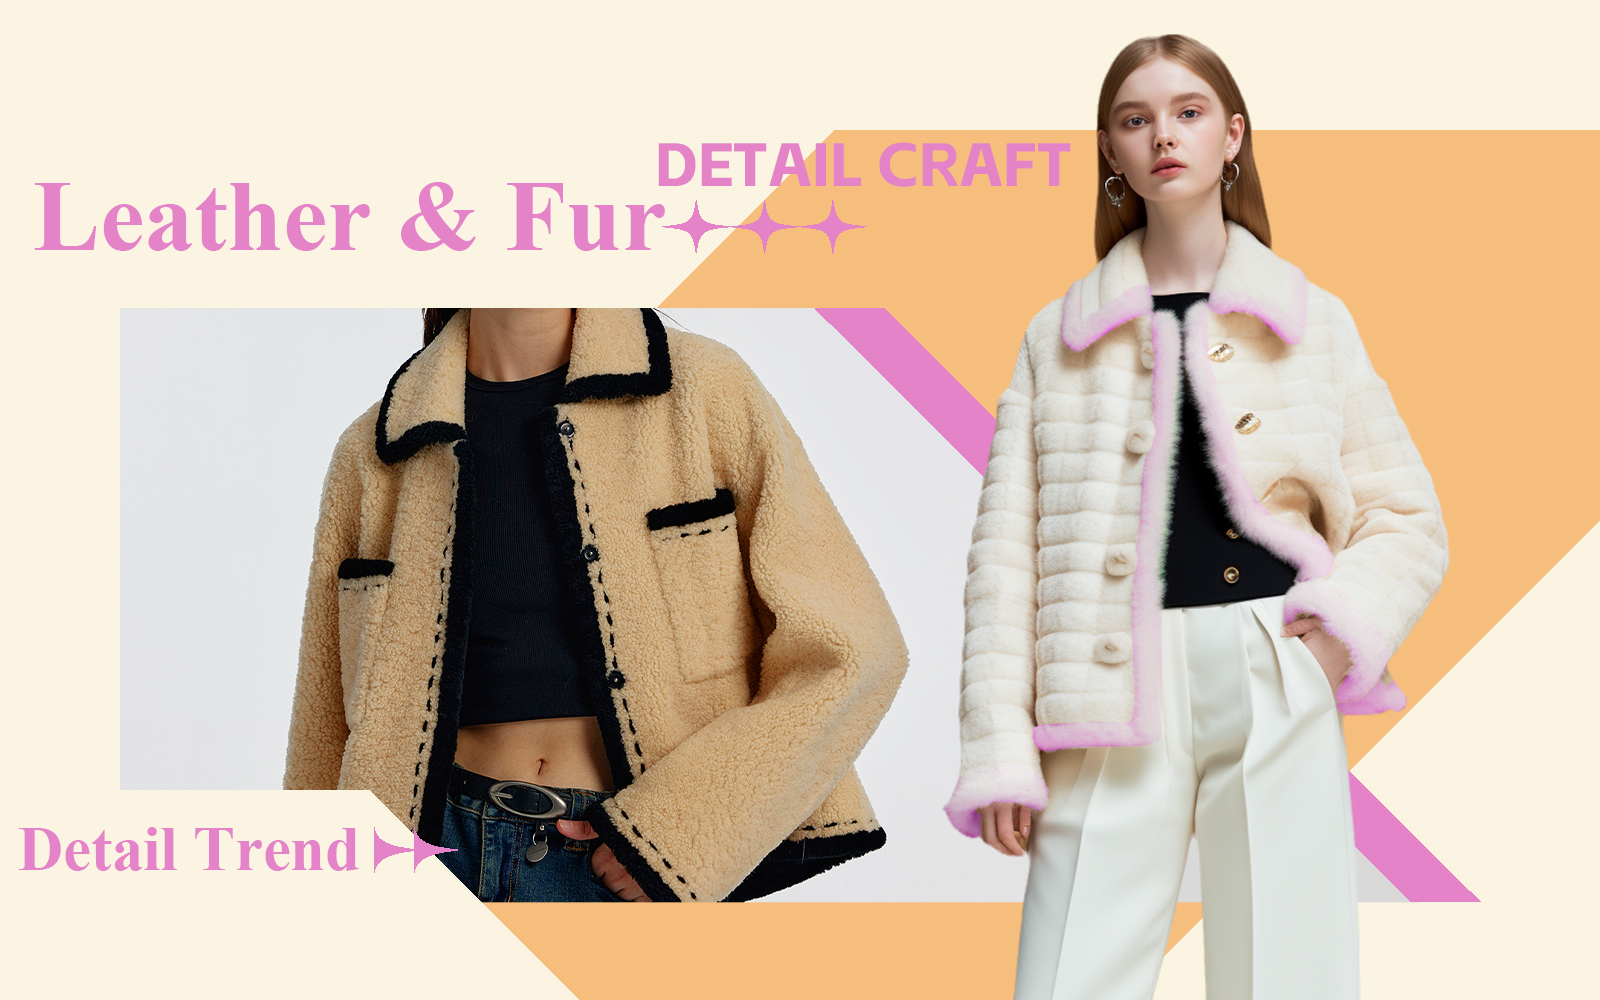 Chanel Heritage -- The Detail & Craft Trend for Women's Leather & Fur